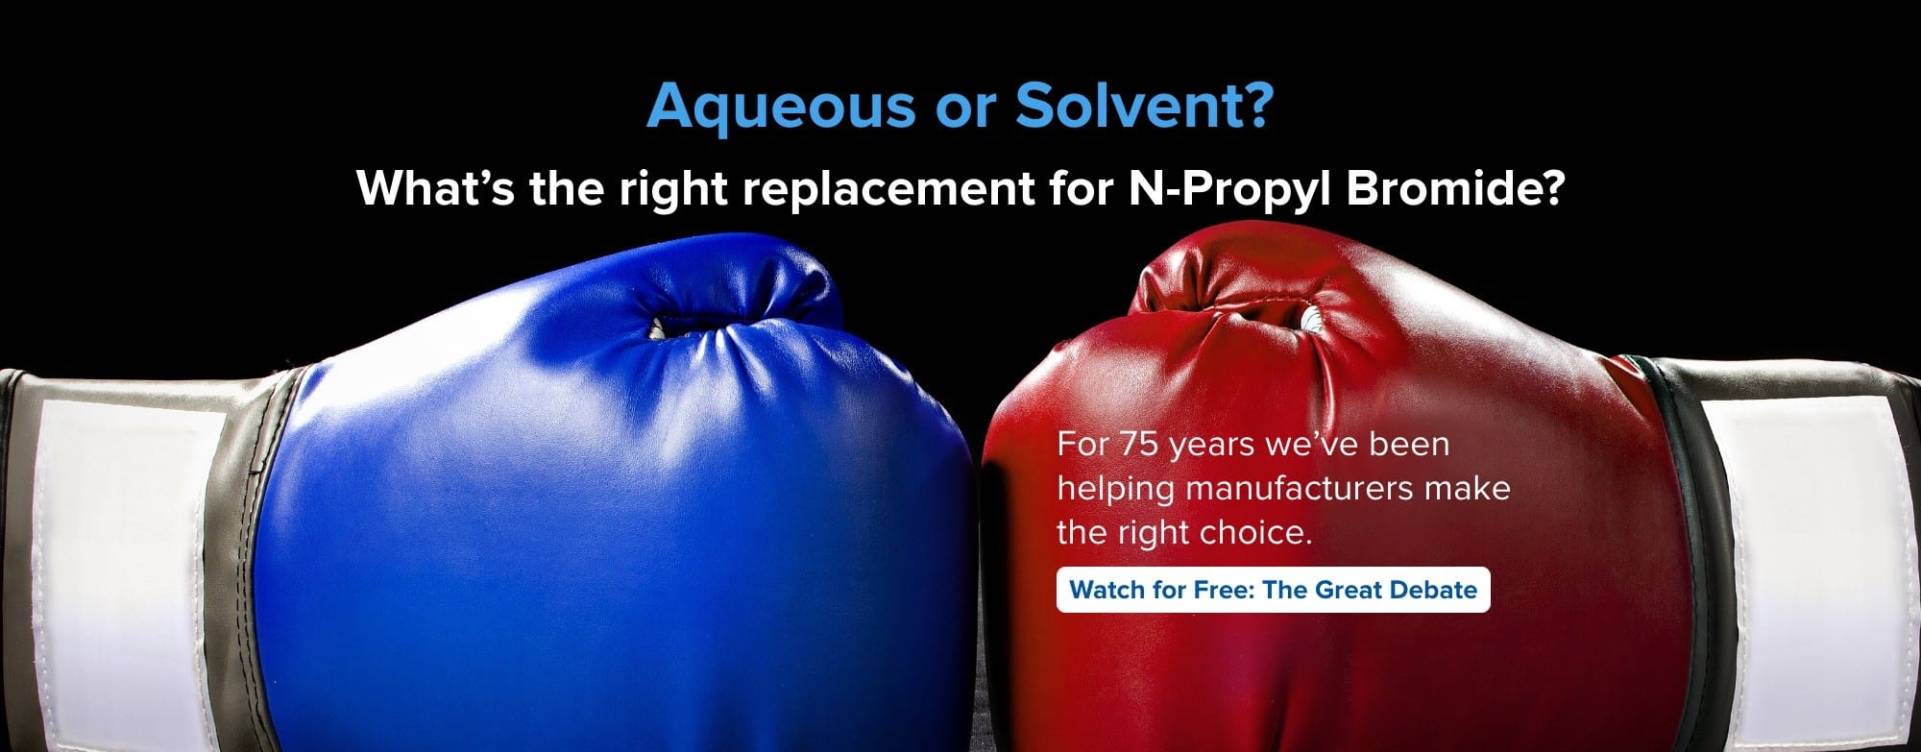 Aqueous or Solvent? Watch the great debate